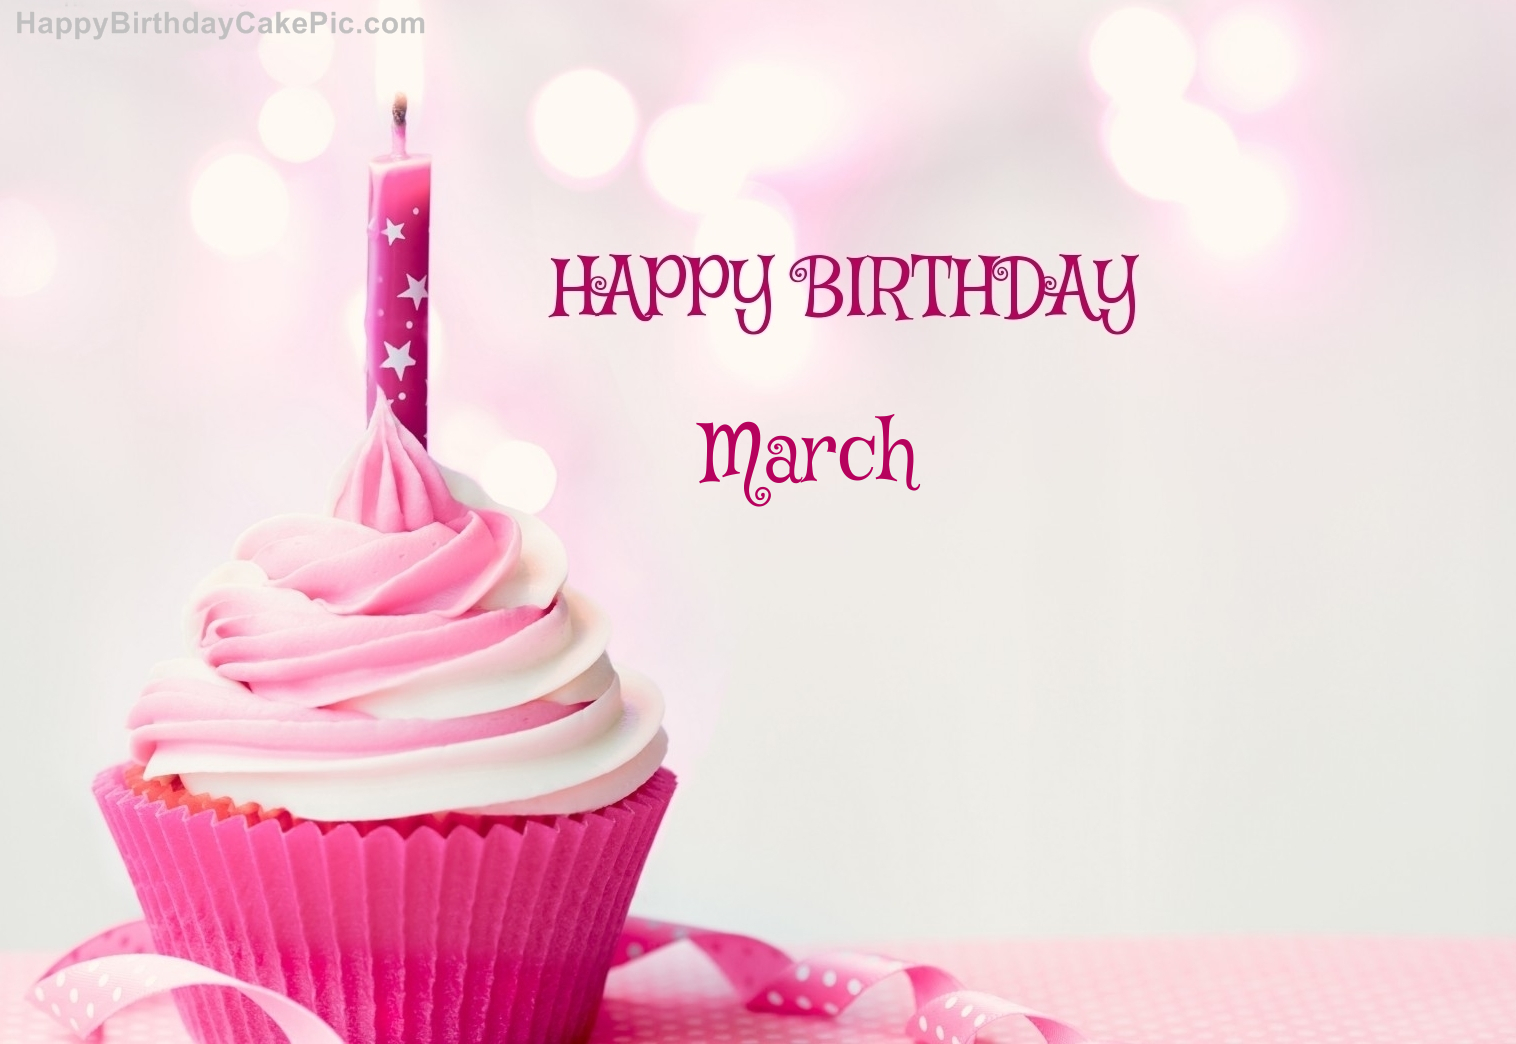 Image result for happy birthday march cupcake pics